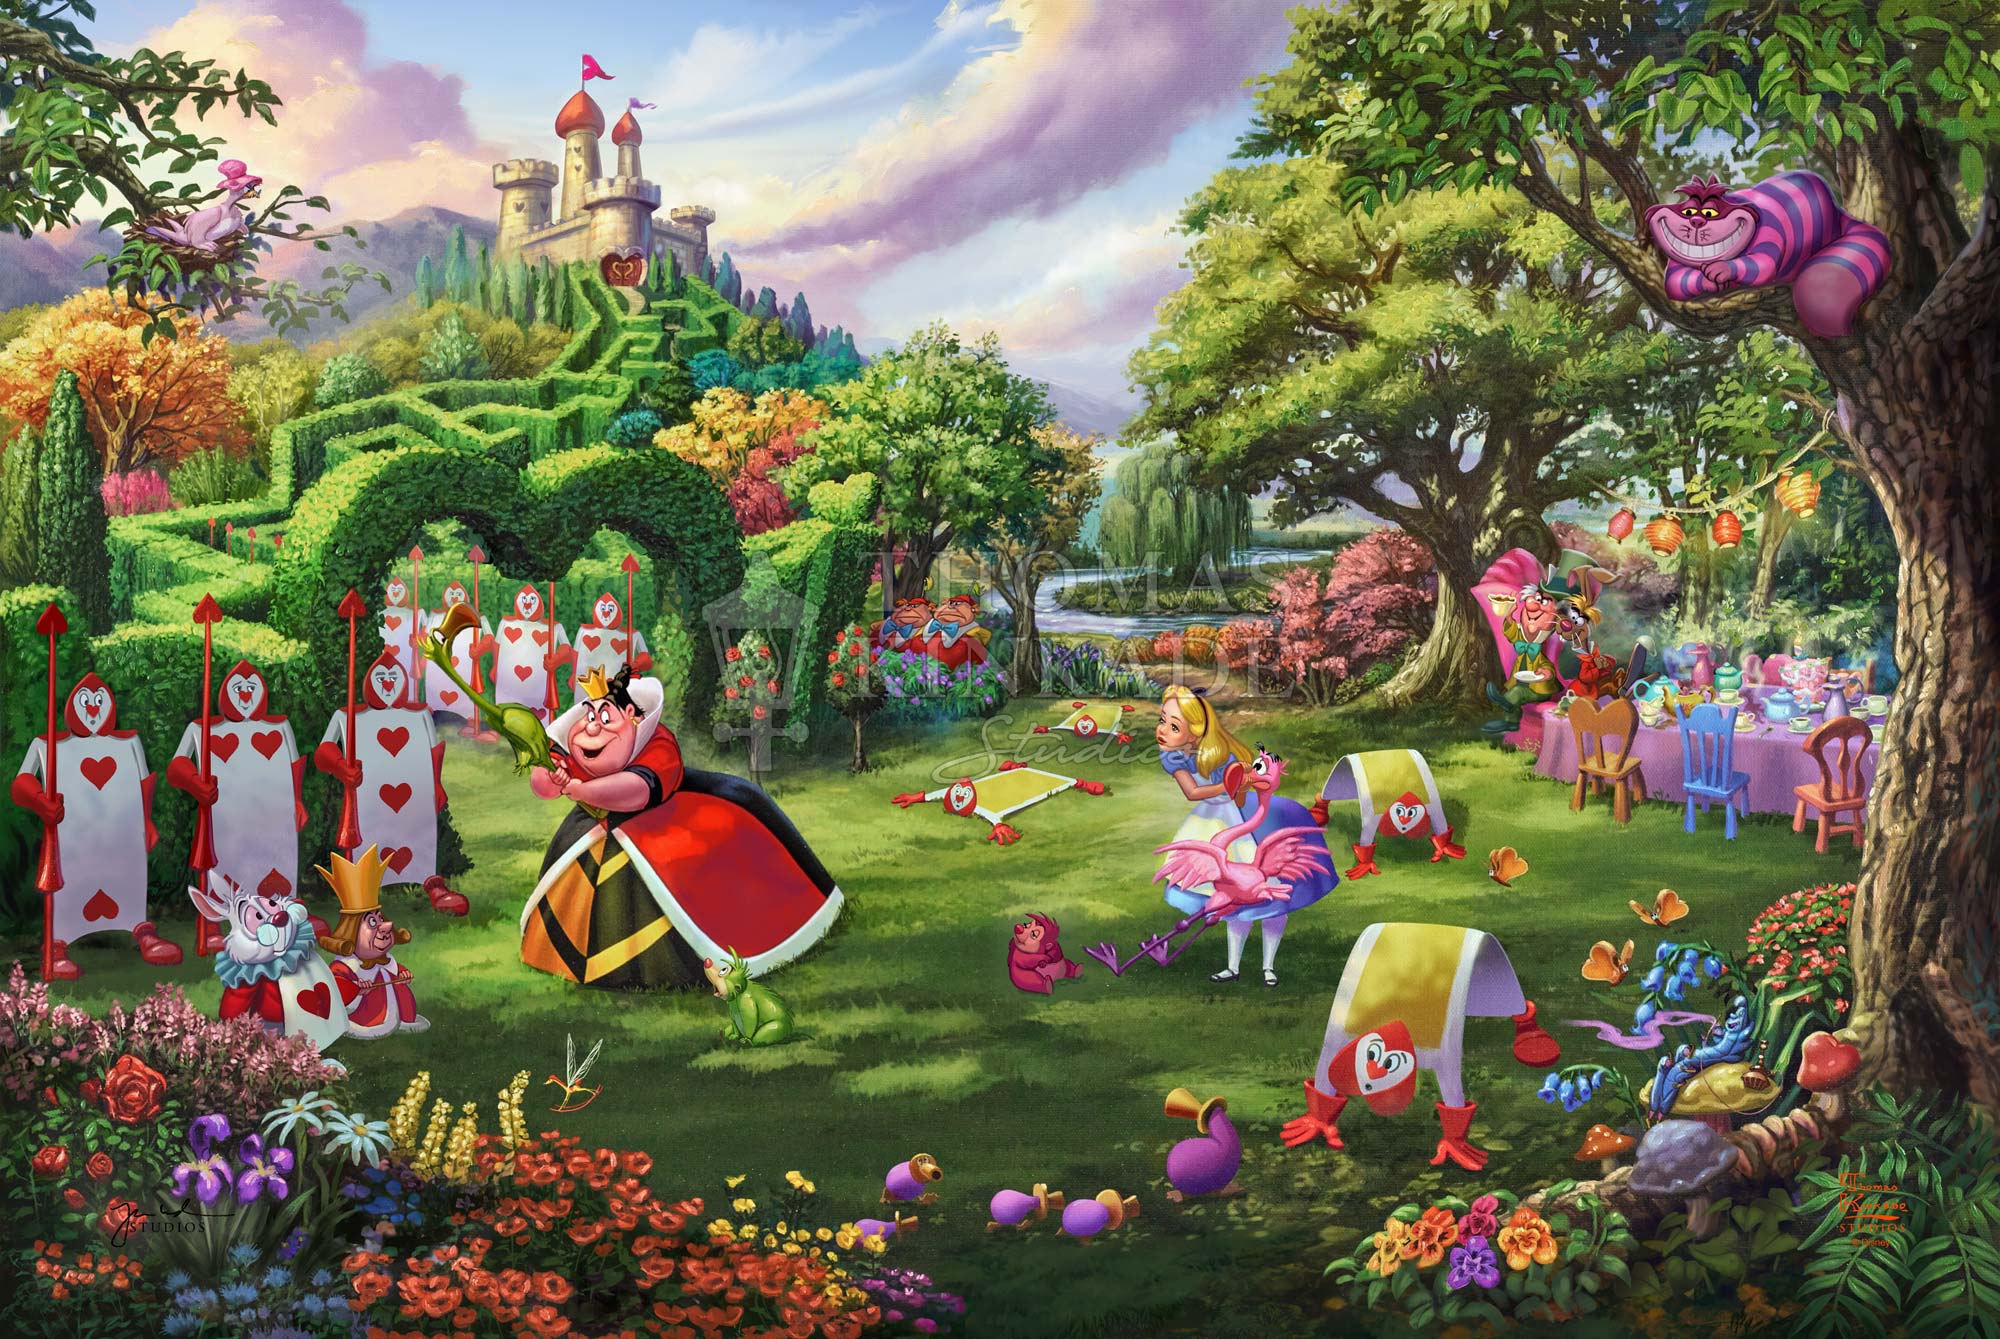 The Queen of Hearts plays croquet with flamingo mallets and hedgehog balls while the White Rabbit and Alice look on.   -  Unframed